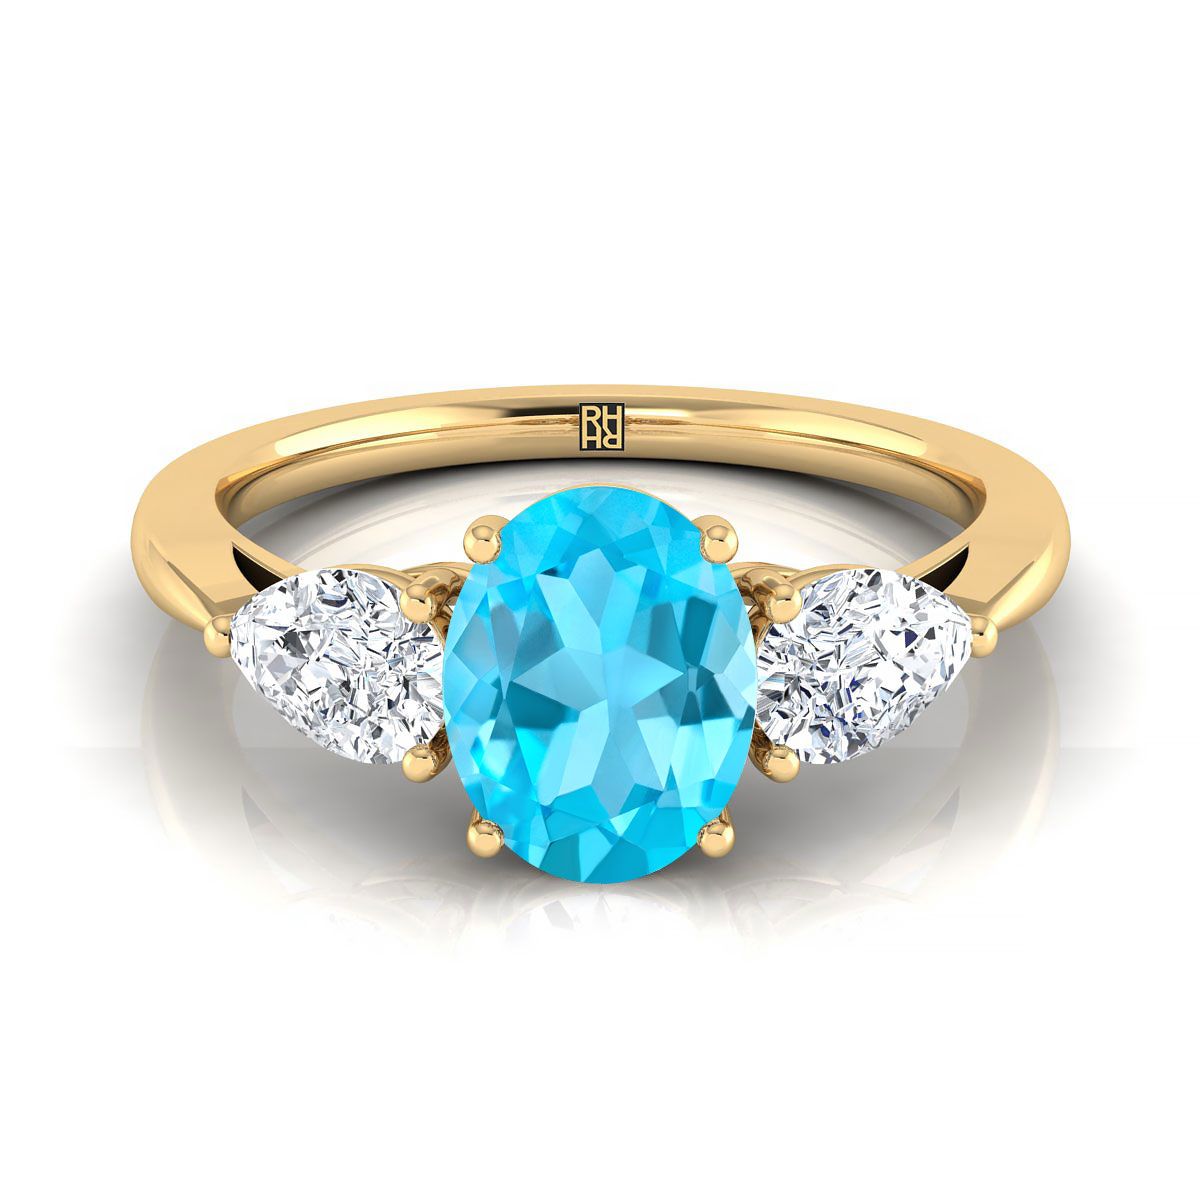 18K Yellow Gold Oval Swiss Blue Topaz Perfectly Matched Pear Shaped Three Diamond Engagement Ring -7/8ctw